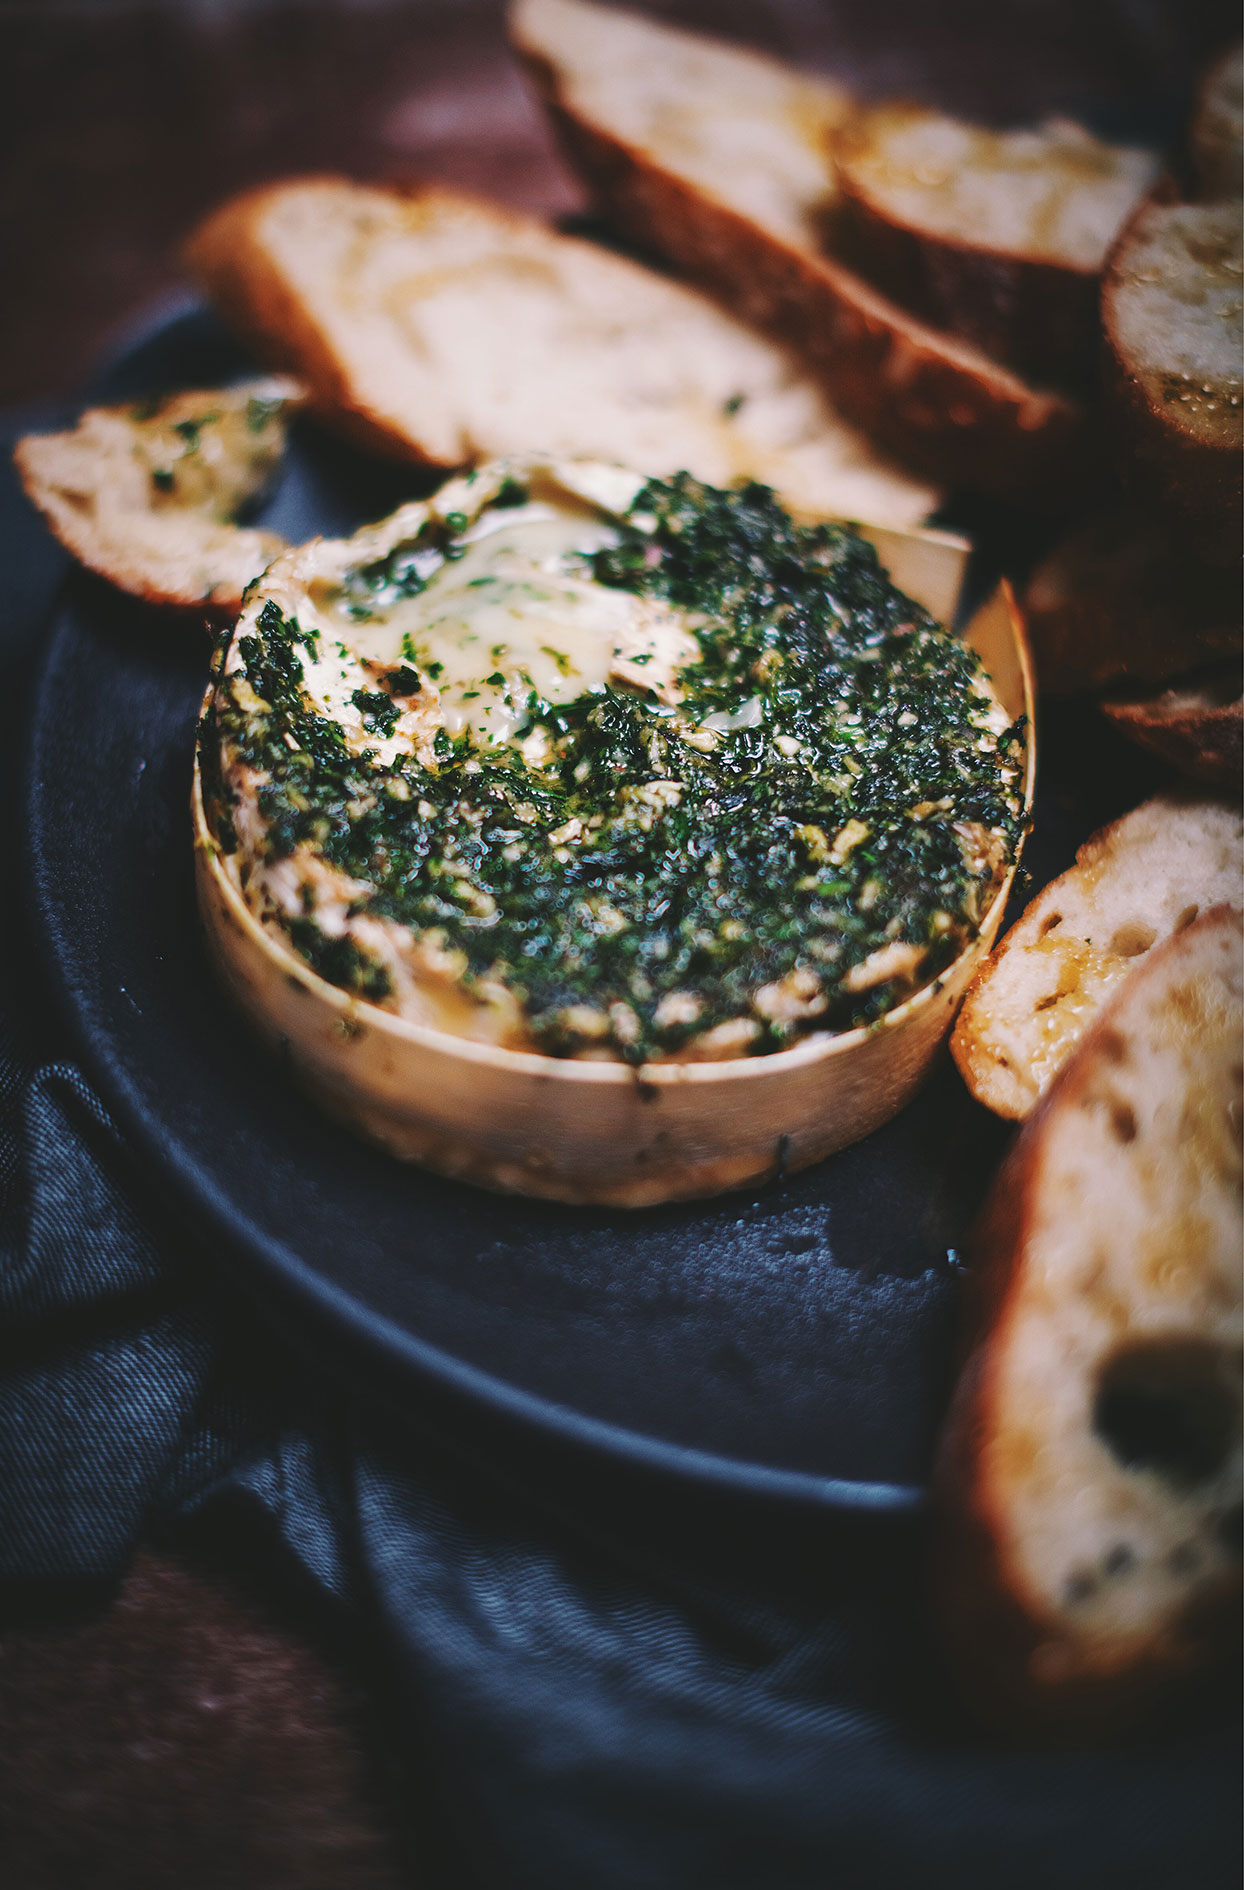 Melting camembert with fine herbs